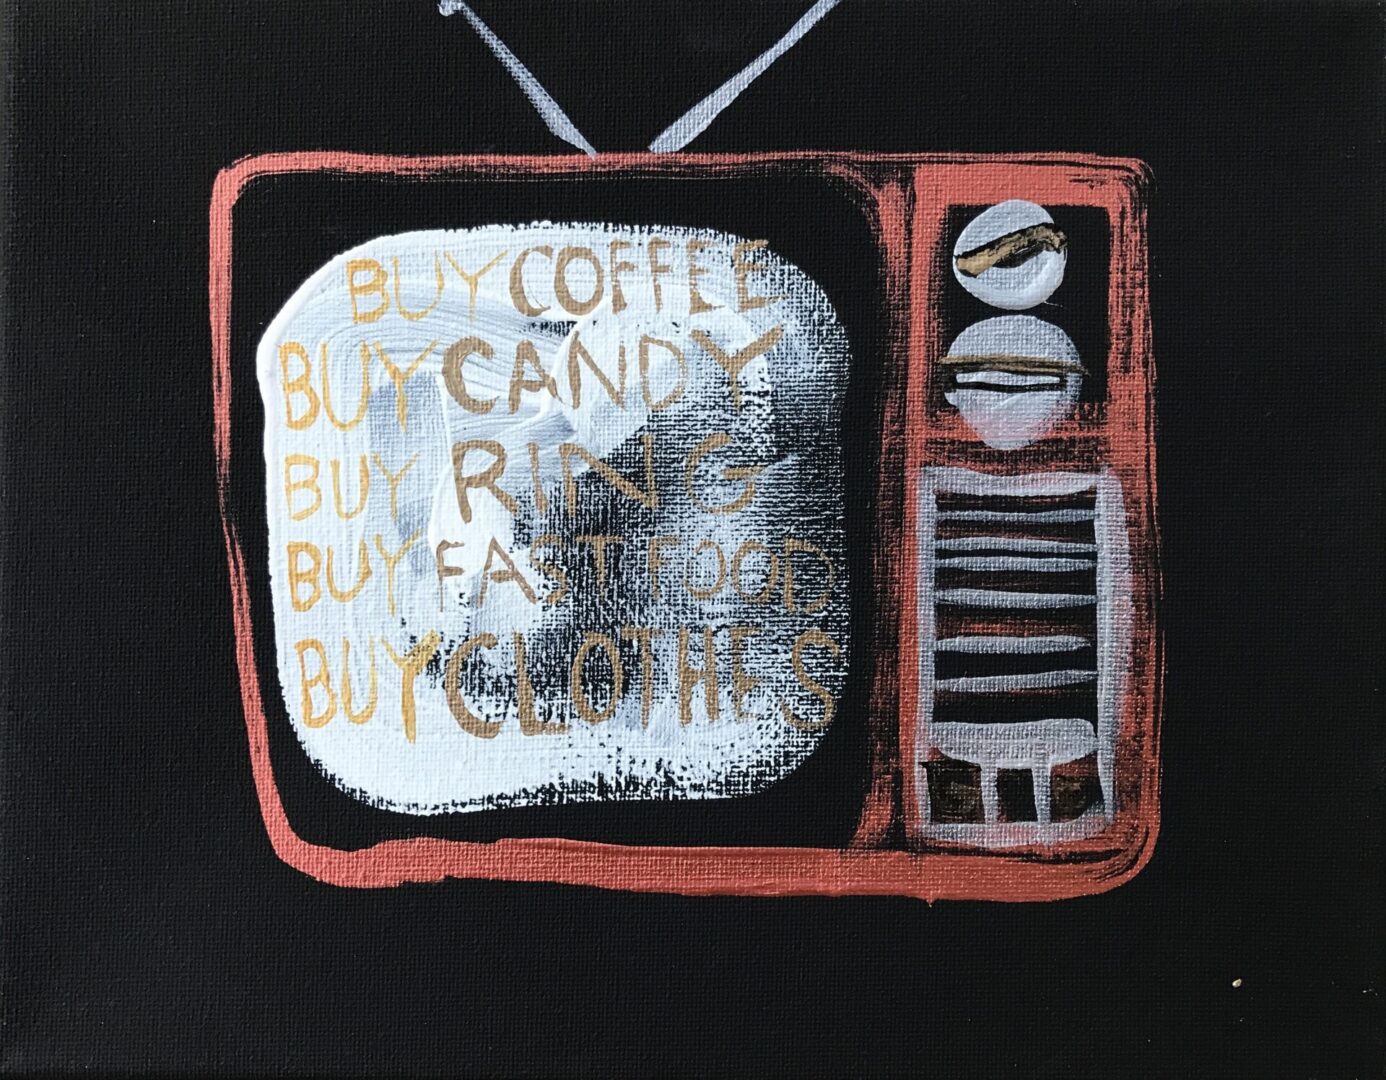 A painting of a television set with a candy ad